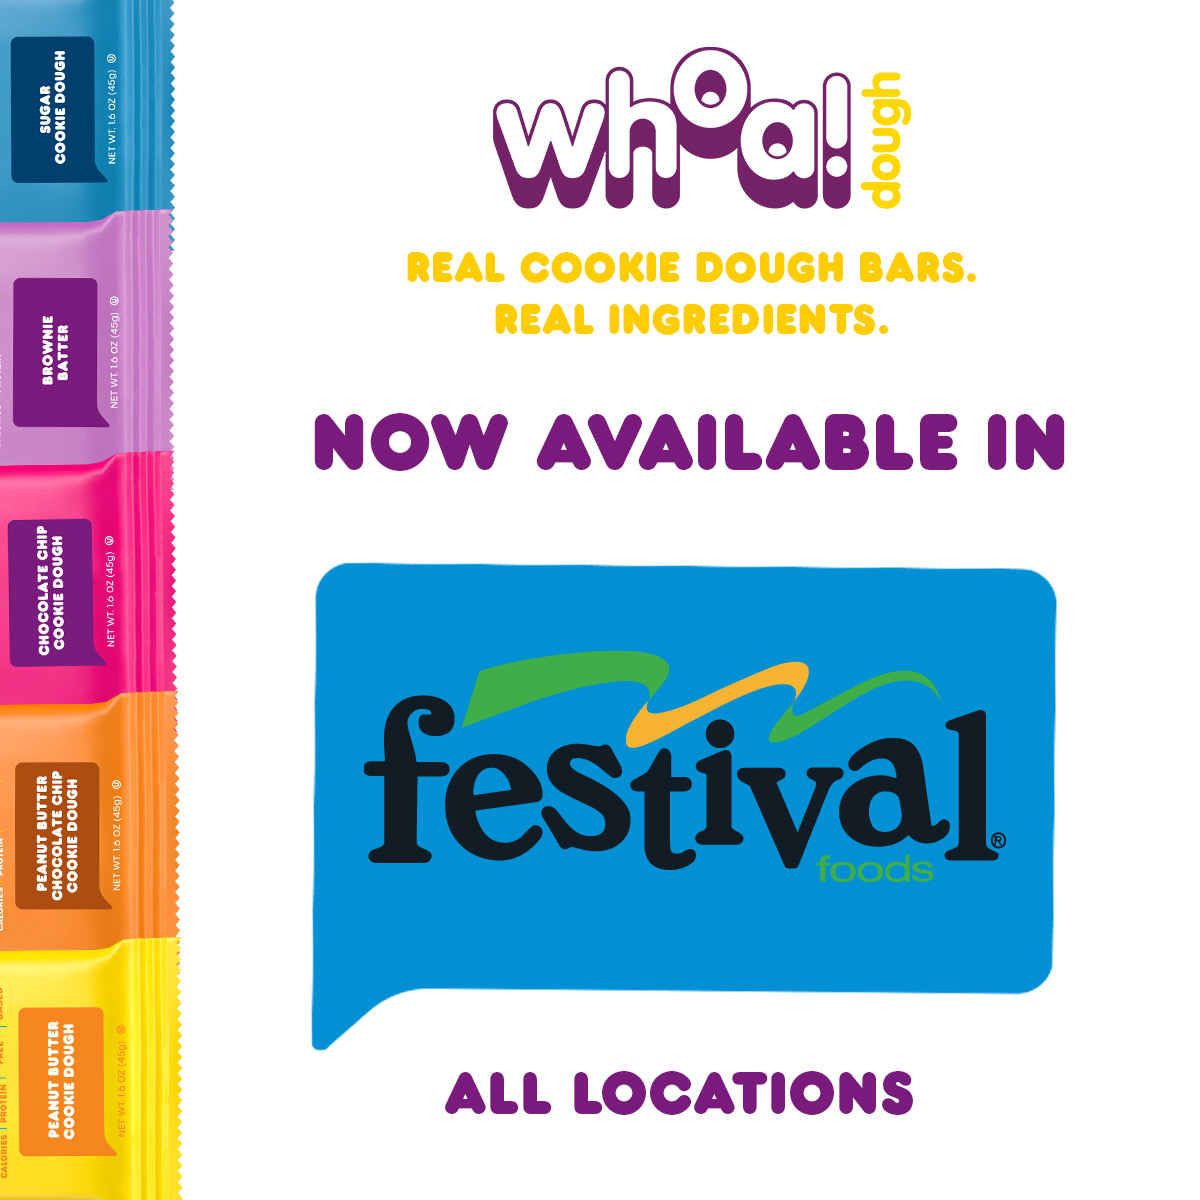 Whoa Dough, a Line of Plant Based, Gluten Free & Vegan Cookie